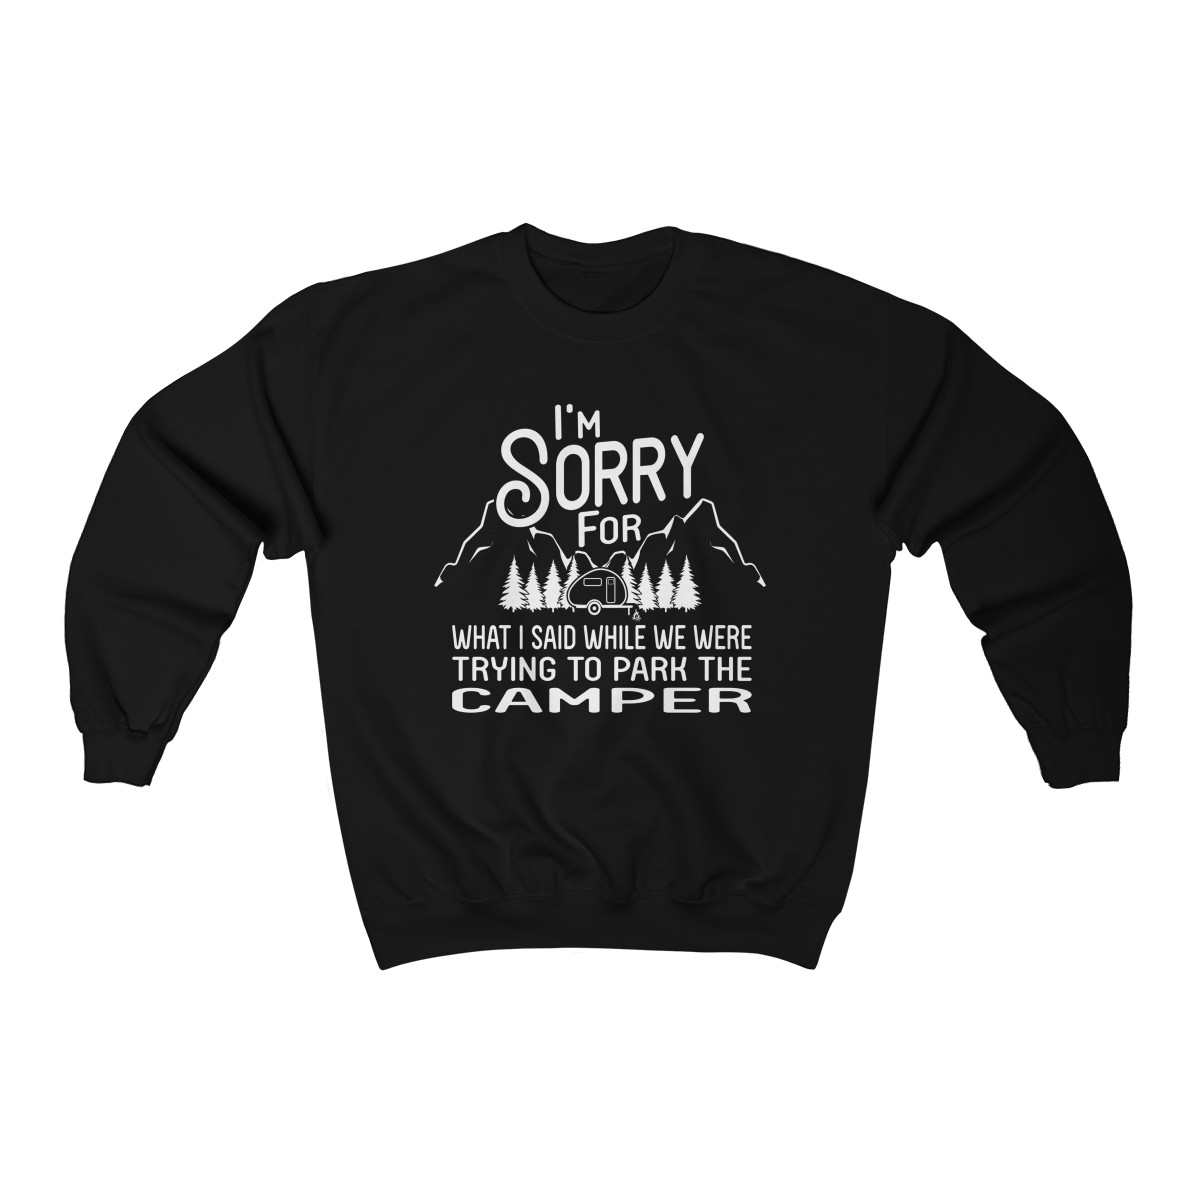 I'm Sorry For What I Said When Park The Camper Quote Unisex T-Shirt, Sweatshirt, Hoodie